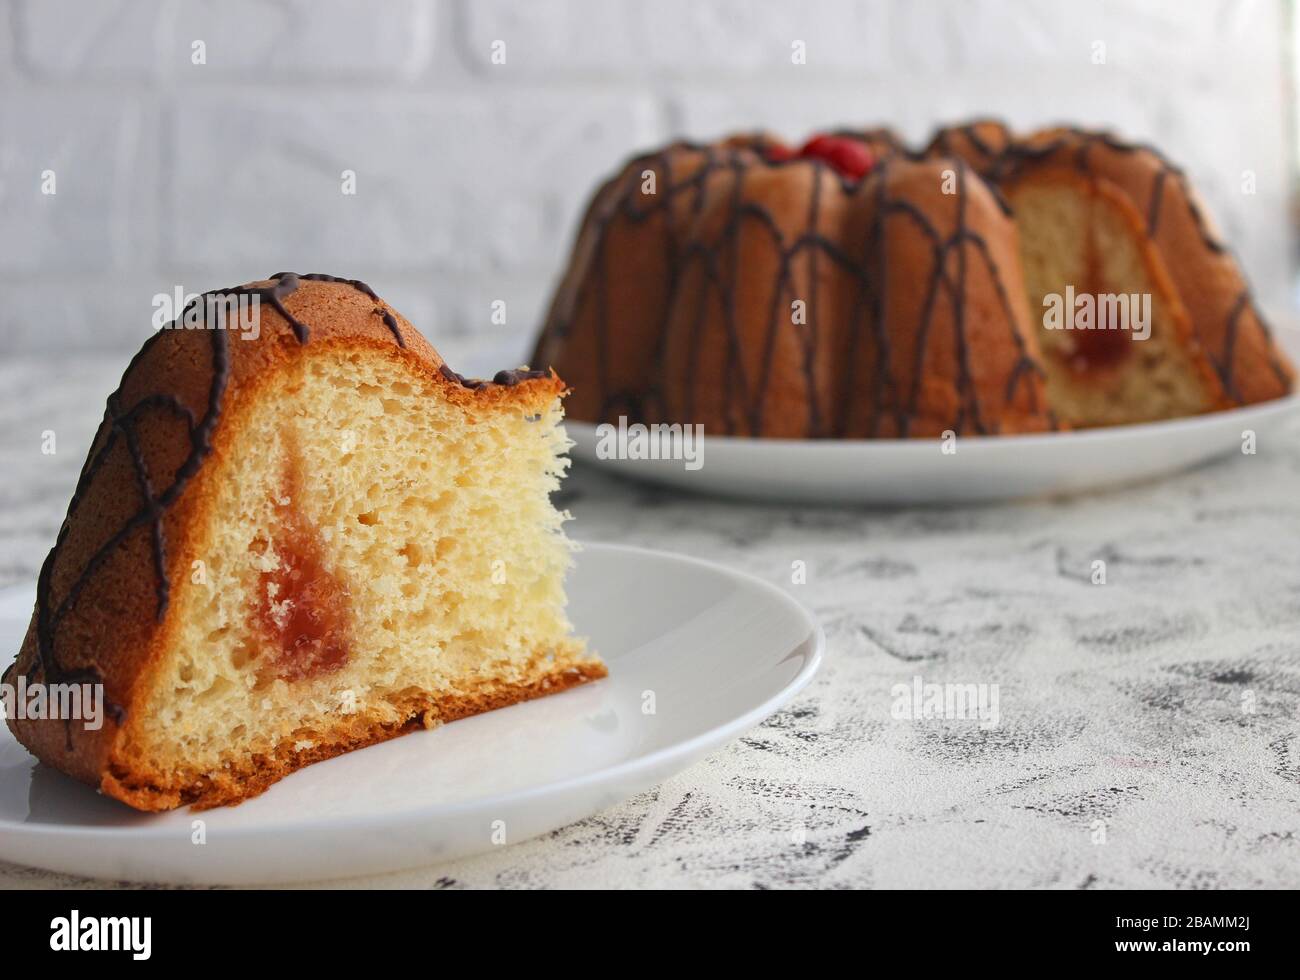 Slices of cake on a plate. In the background is the cake itself. On a dark and light background. Strawberry and Cream Filling with sugar Stock Photo